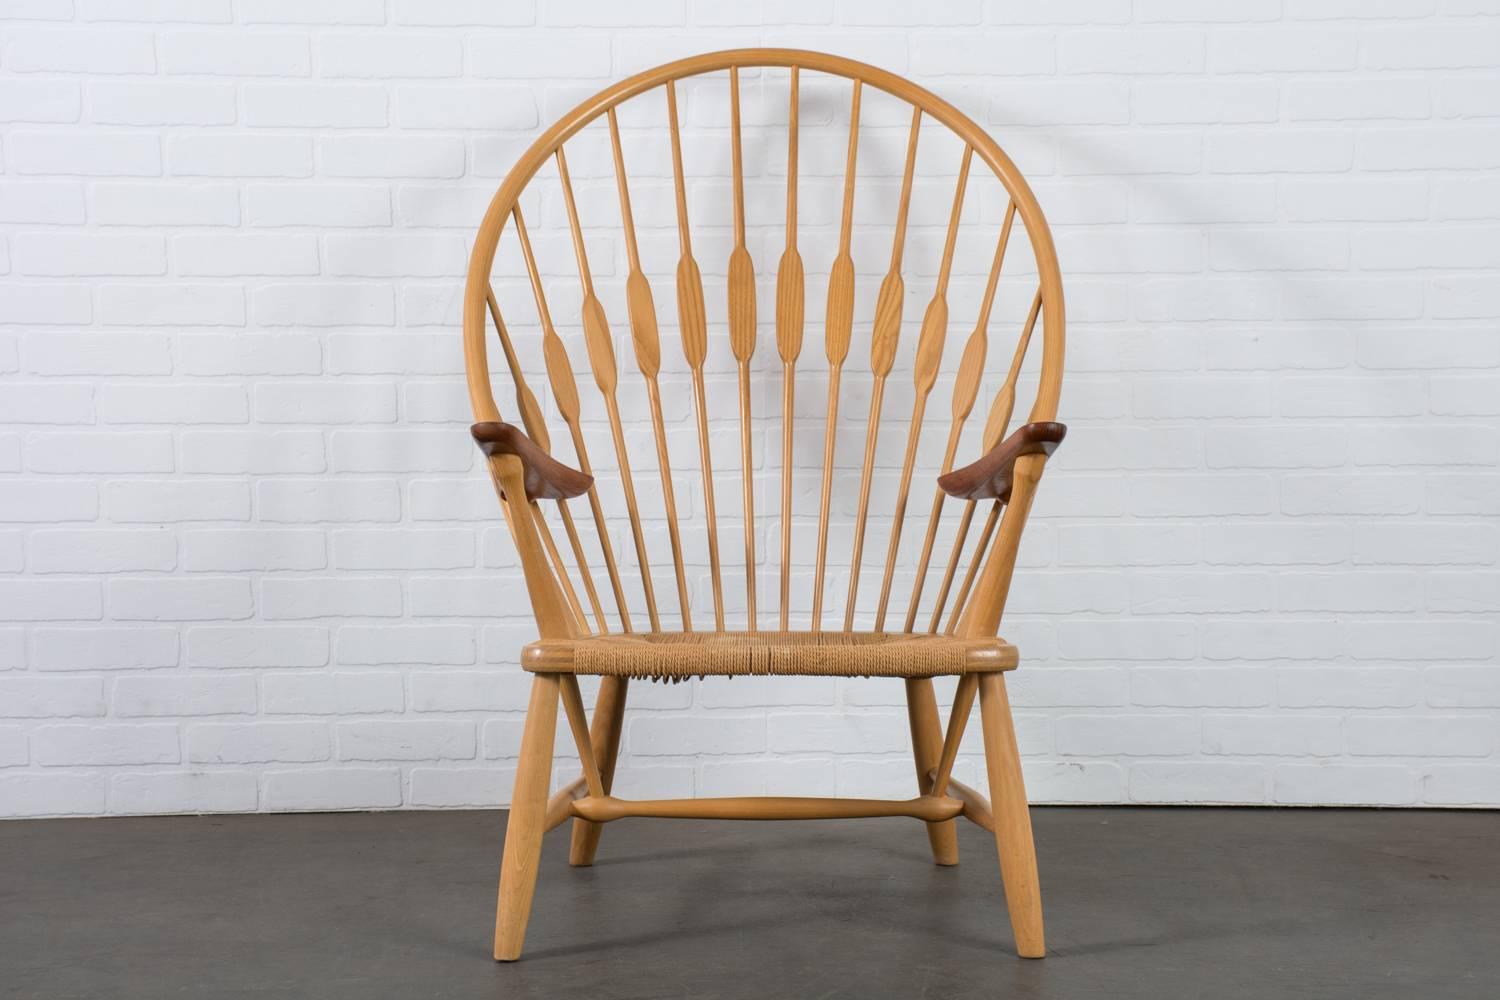 The 'Peacock' chair was designed by Hans Wegner in 1947 and manufactured by Johannes Hansen, Denmark. It features a solid ash frame with a rounded high back, contrasting teak arms, and a woven paper cord seat. 